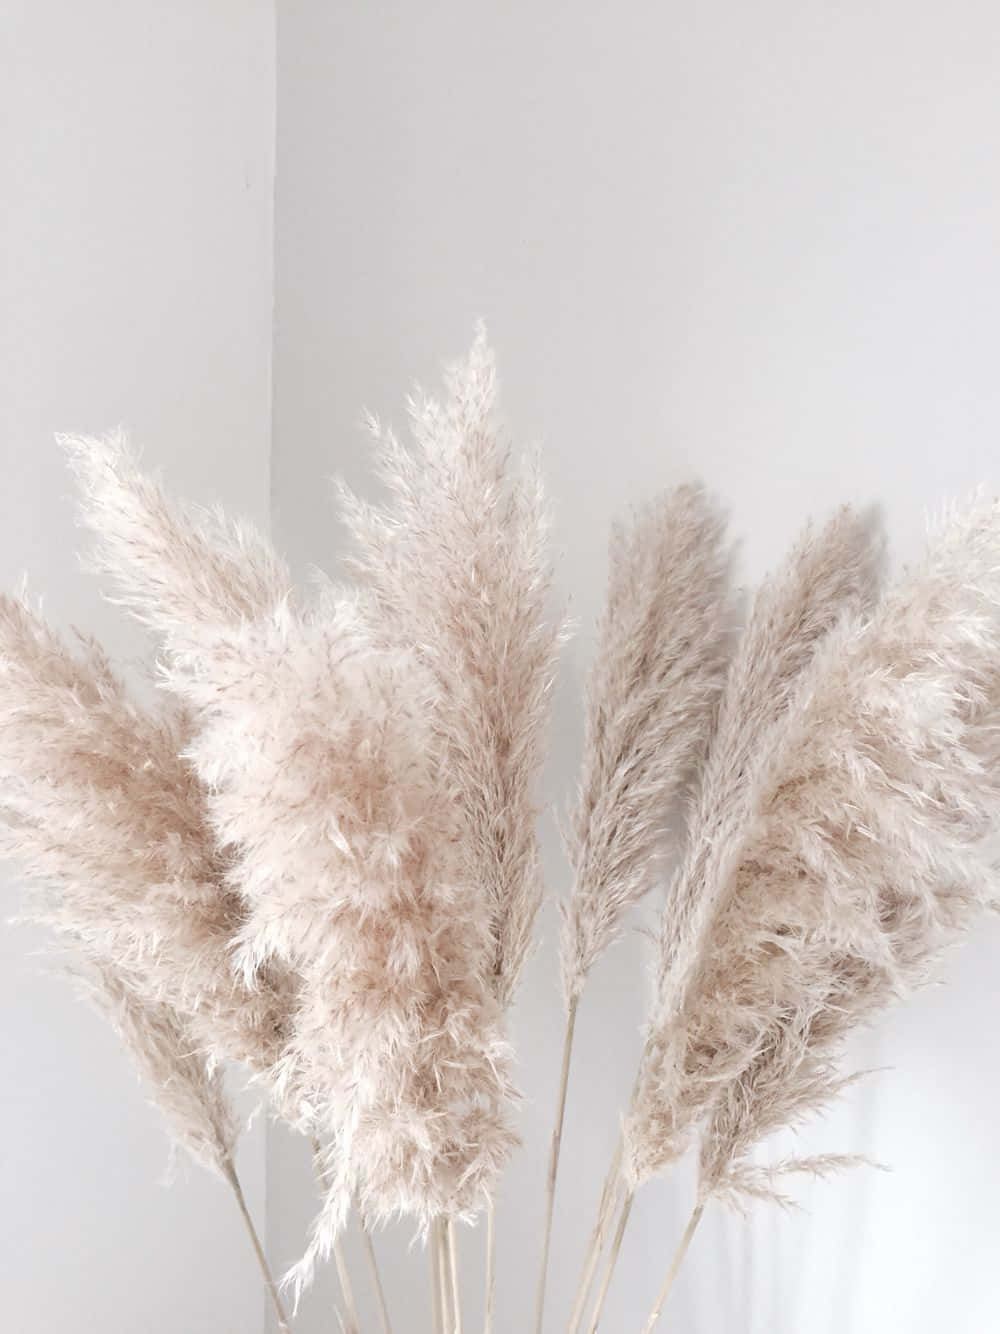 Pampas Grass Background At Corner Of Wall